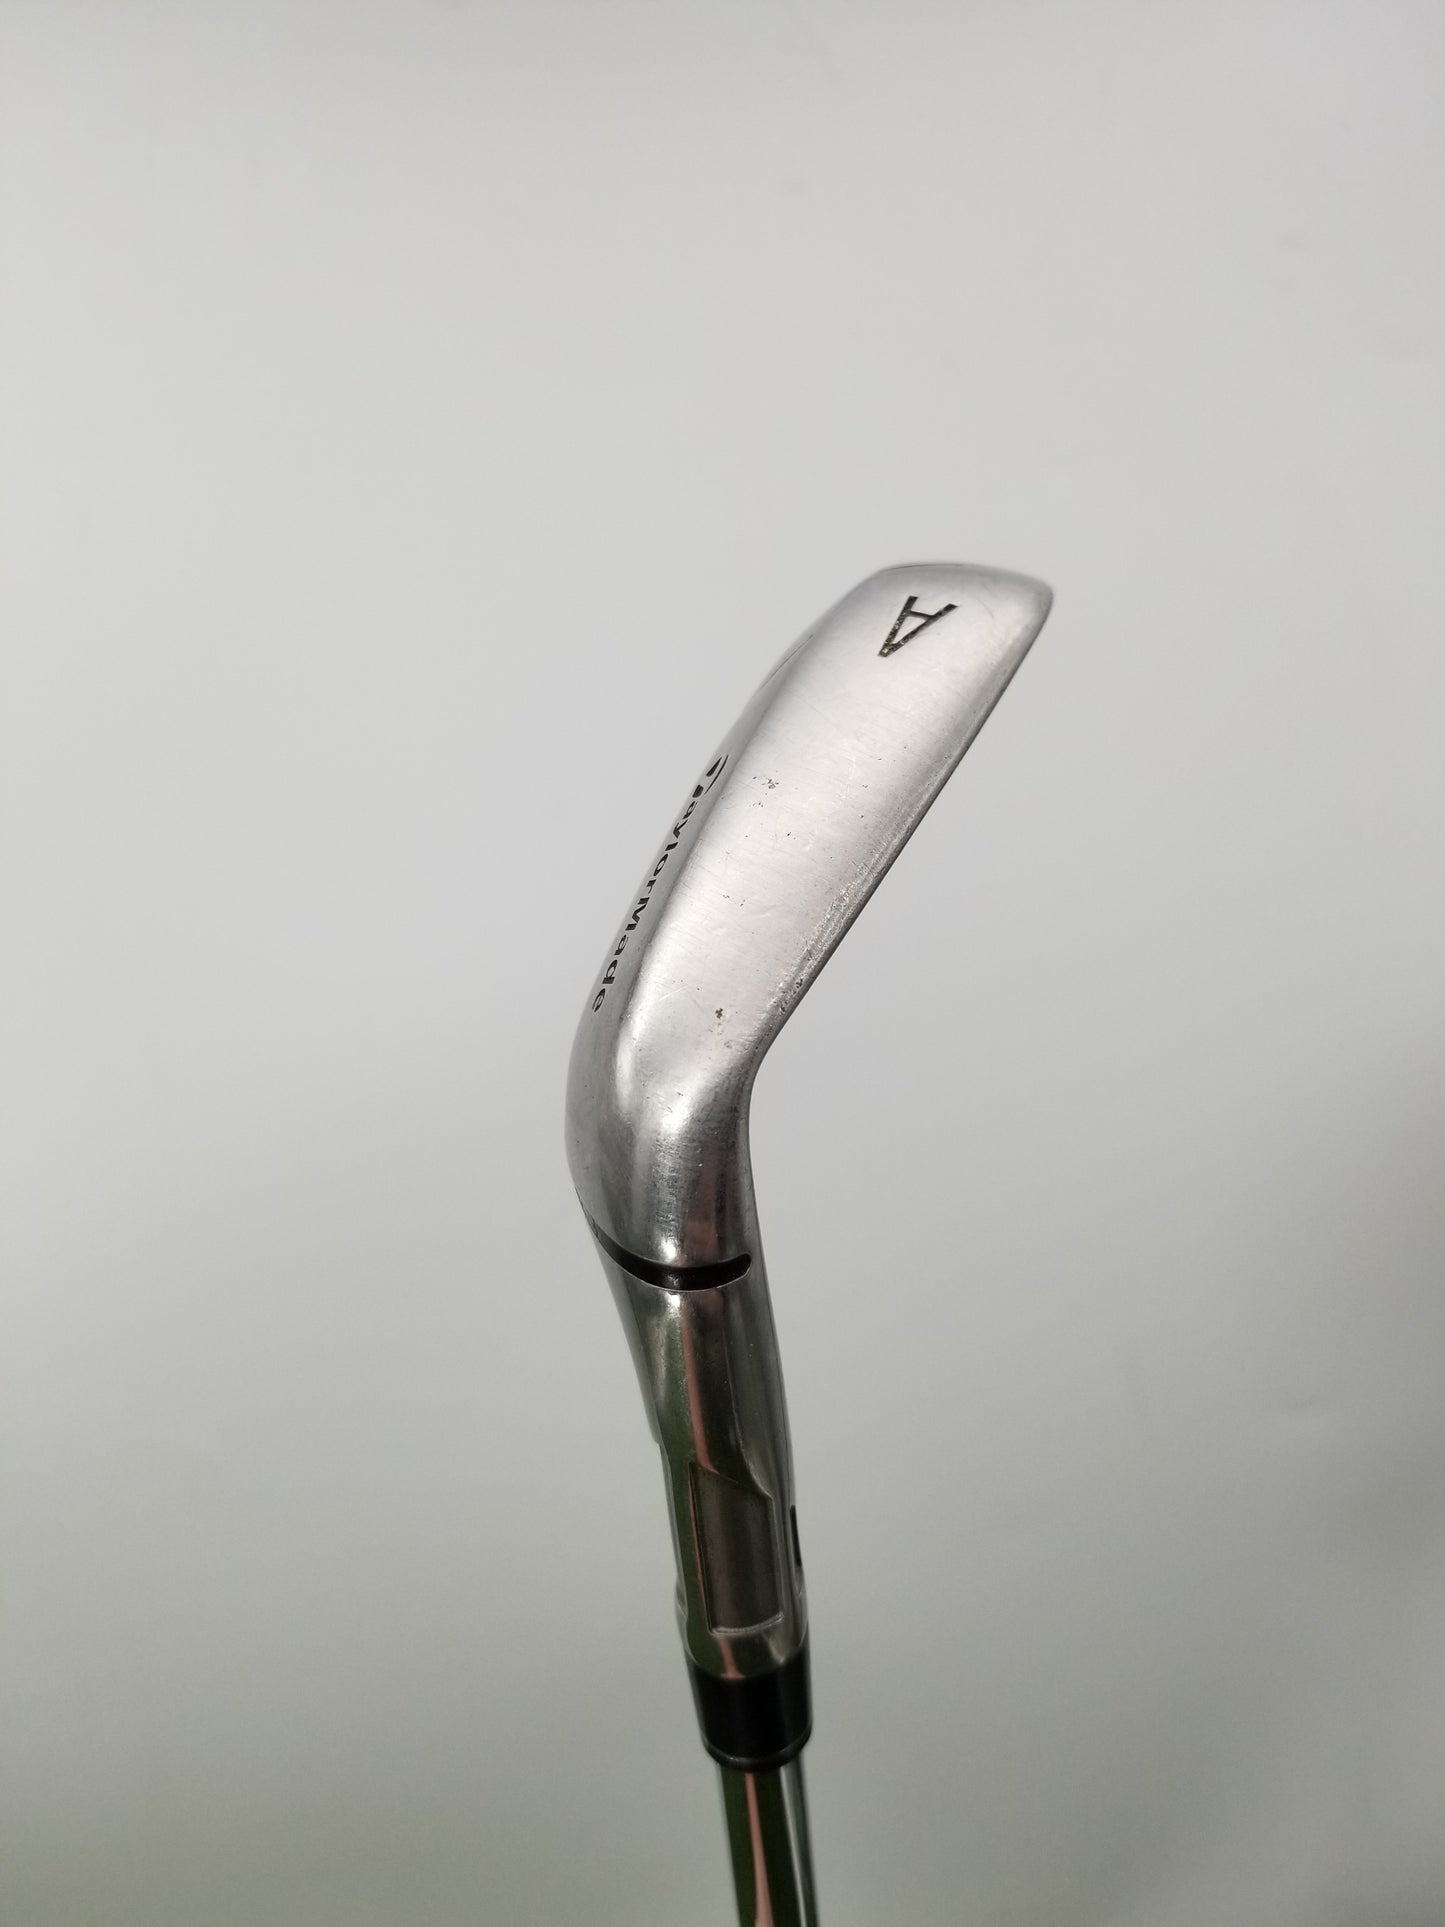 2020 TAYLORMADE SIM MAX OS APPROACH WEDGE REGULAR NIPPON NS PRO 950GH GOOD